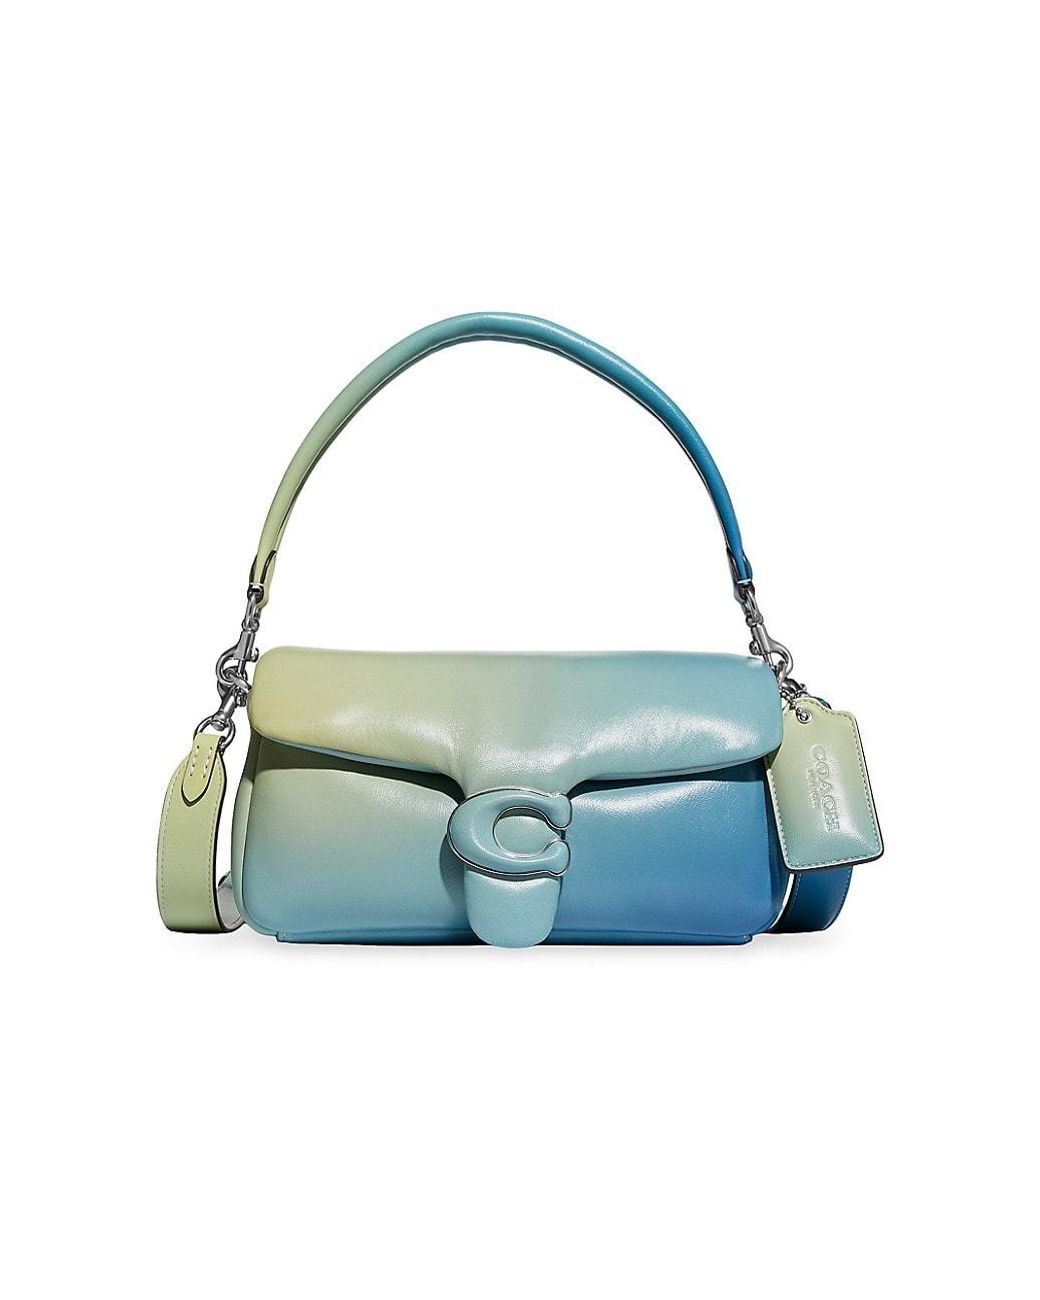 COACH Pillow Tabby Ombré Leather Shoulder Bag in Blue | Lyst